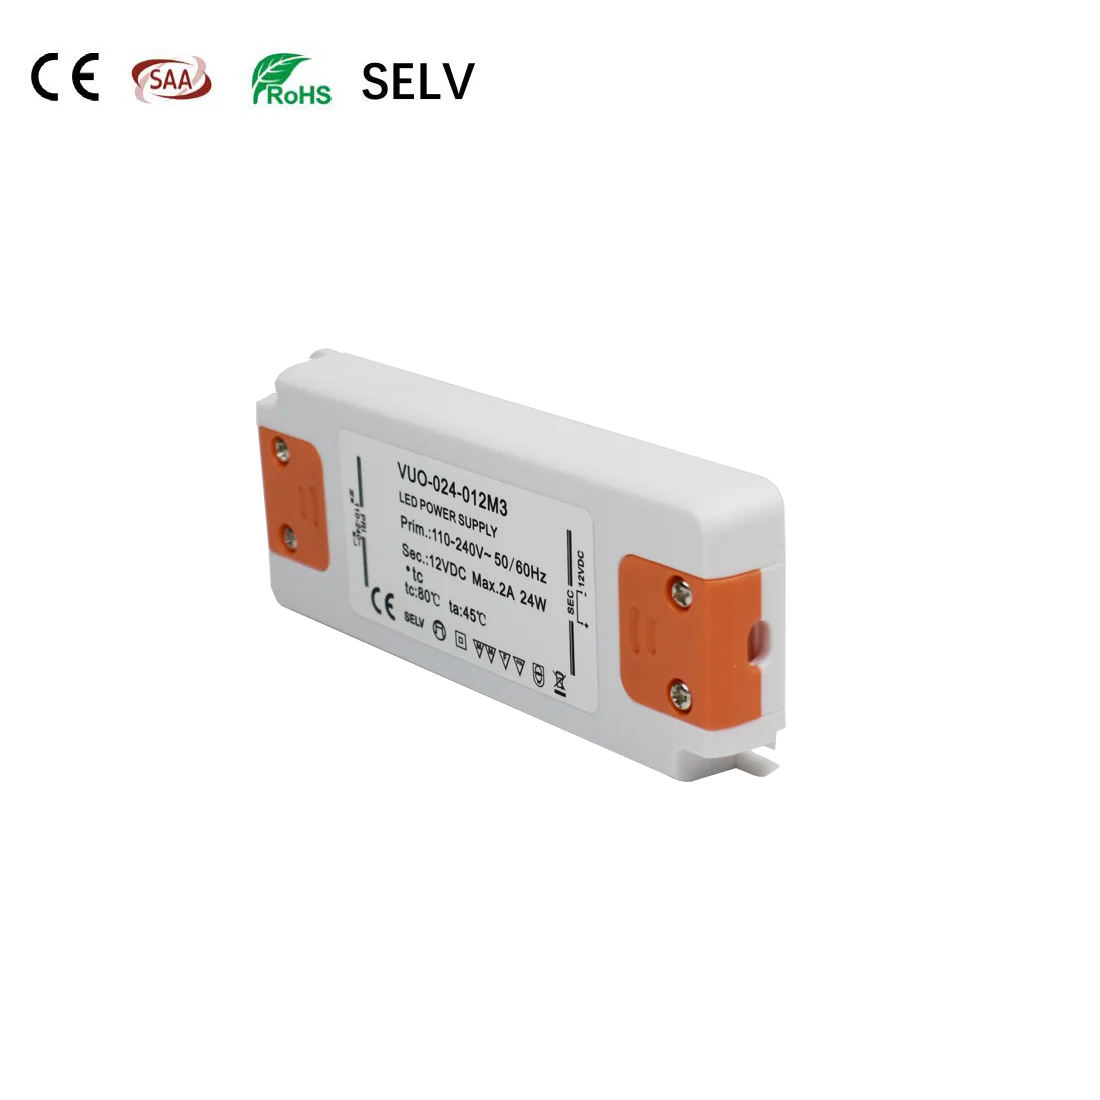 Constant Voltage DC 12V 24W 40W 60W Power Supply Transformer Source Adapter For COB Led Strip CE RoHs SAA SELV Vertified